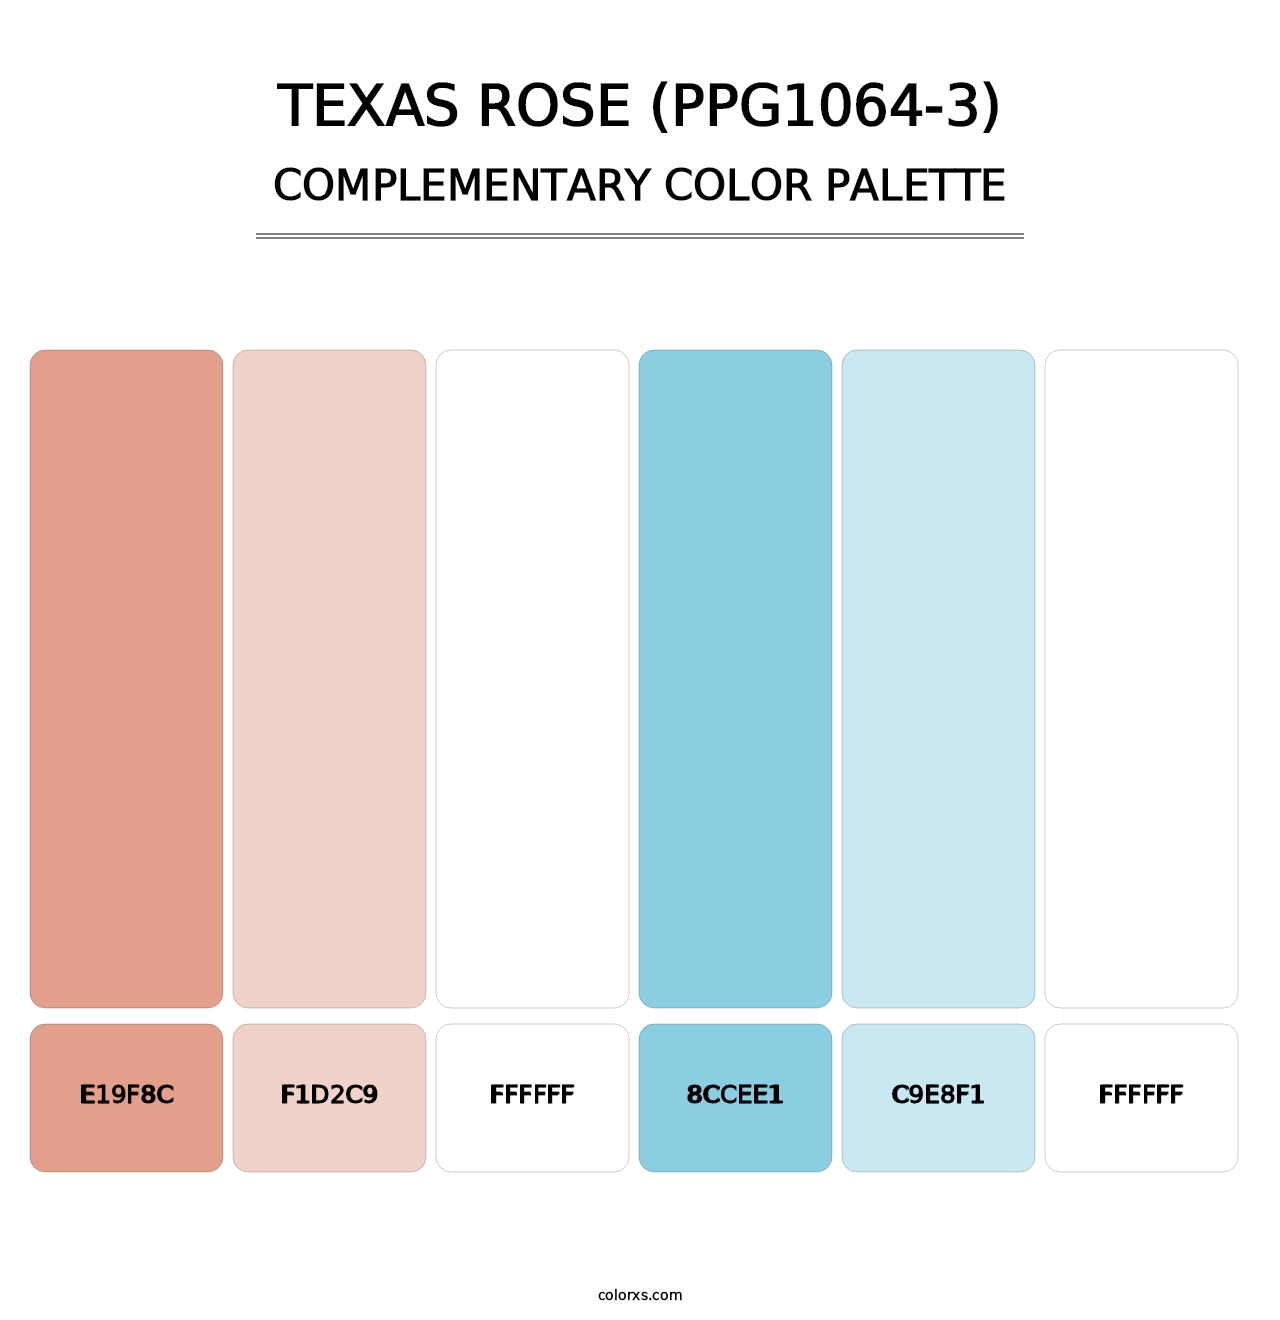 Texas Rose (PPG1064-3) - Complementary Color Palette